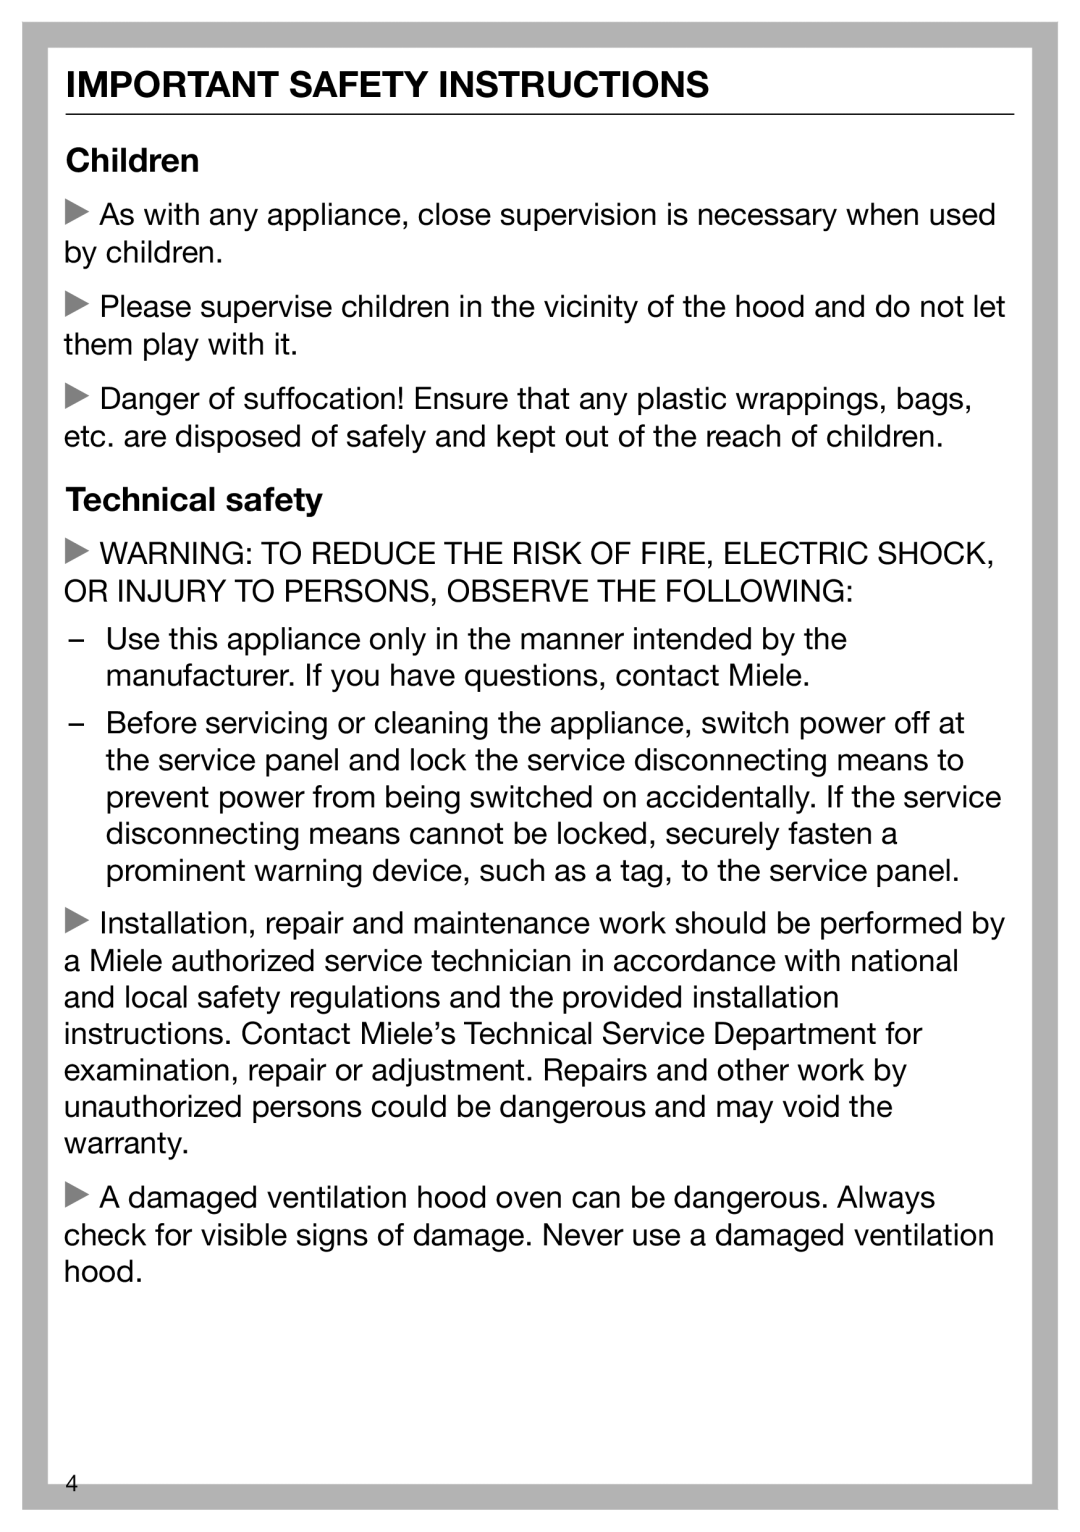 Miele 09 968 280 installation instructions Children, Technical safety, Important Safety Instructions 